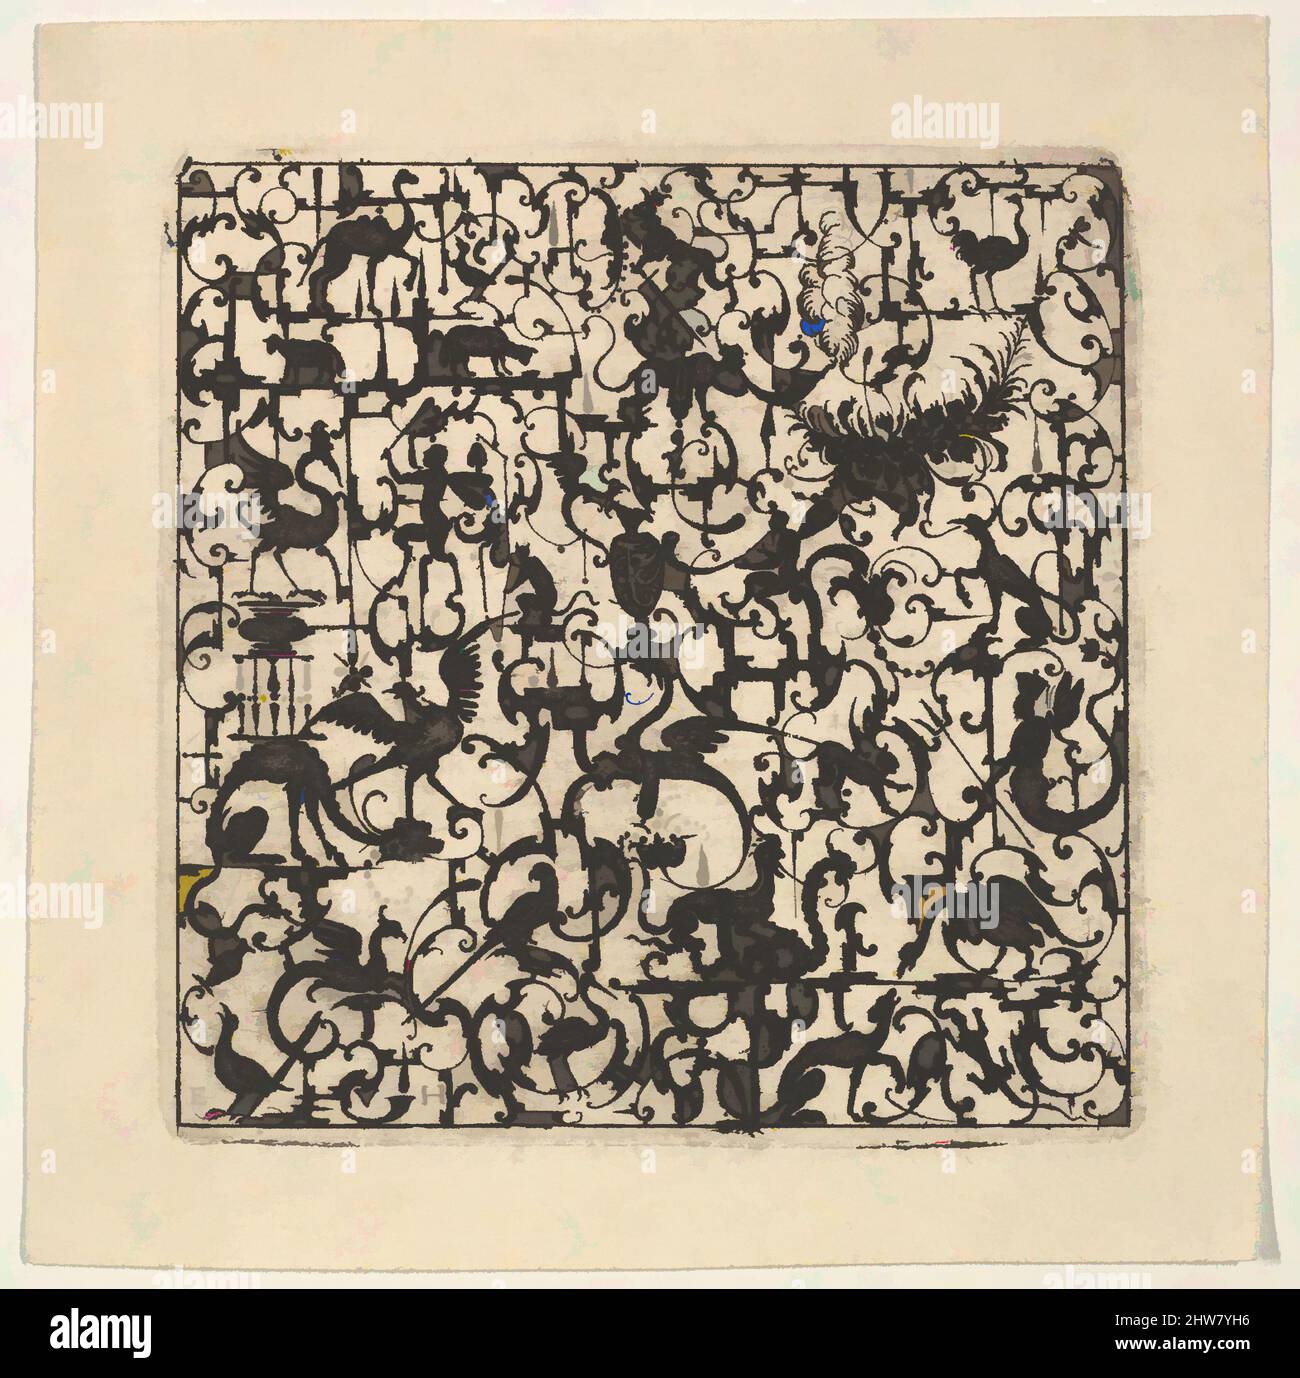 Art inspired by Square Blackwork Design in Silhouette Style with Schweifwerk and Grotesque Figures, 1617, Blackwork, Plate: 4 7/16 x 4 3/8 in. (11.2 x 11.1 cm), Esaias von Hulsen (Dutch, Middelburg ca. 1570–before 1626 Stuttgart), This sheet is part of a series of square grotesque, Classic works modernized by Artotop with a splash of modernity. Shapes, color and value, eye-catching visual impact on art. Emotions through freedom of artworks in a contemporary way. A timeless message pursuing a wildly creative new direction. Artists turning to the digital medium and creating the Artotop NFT Stock Photo